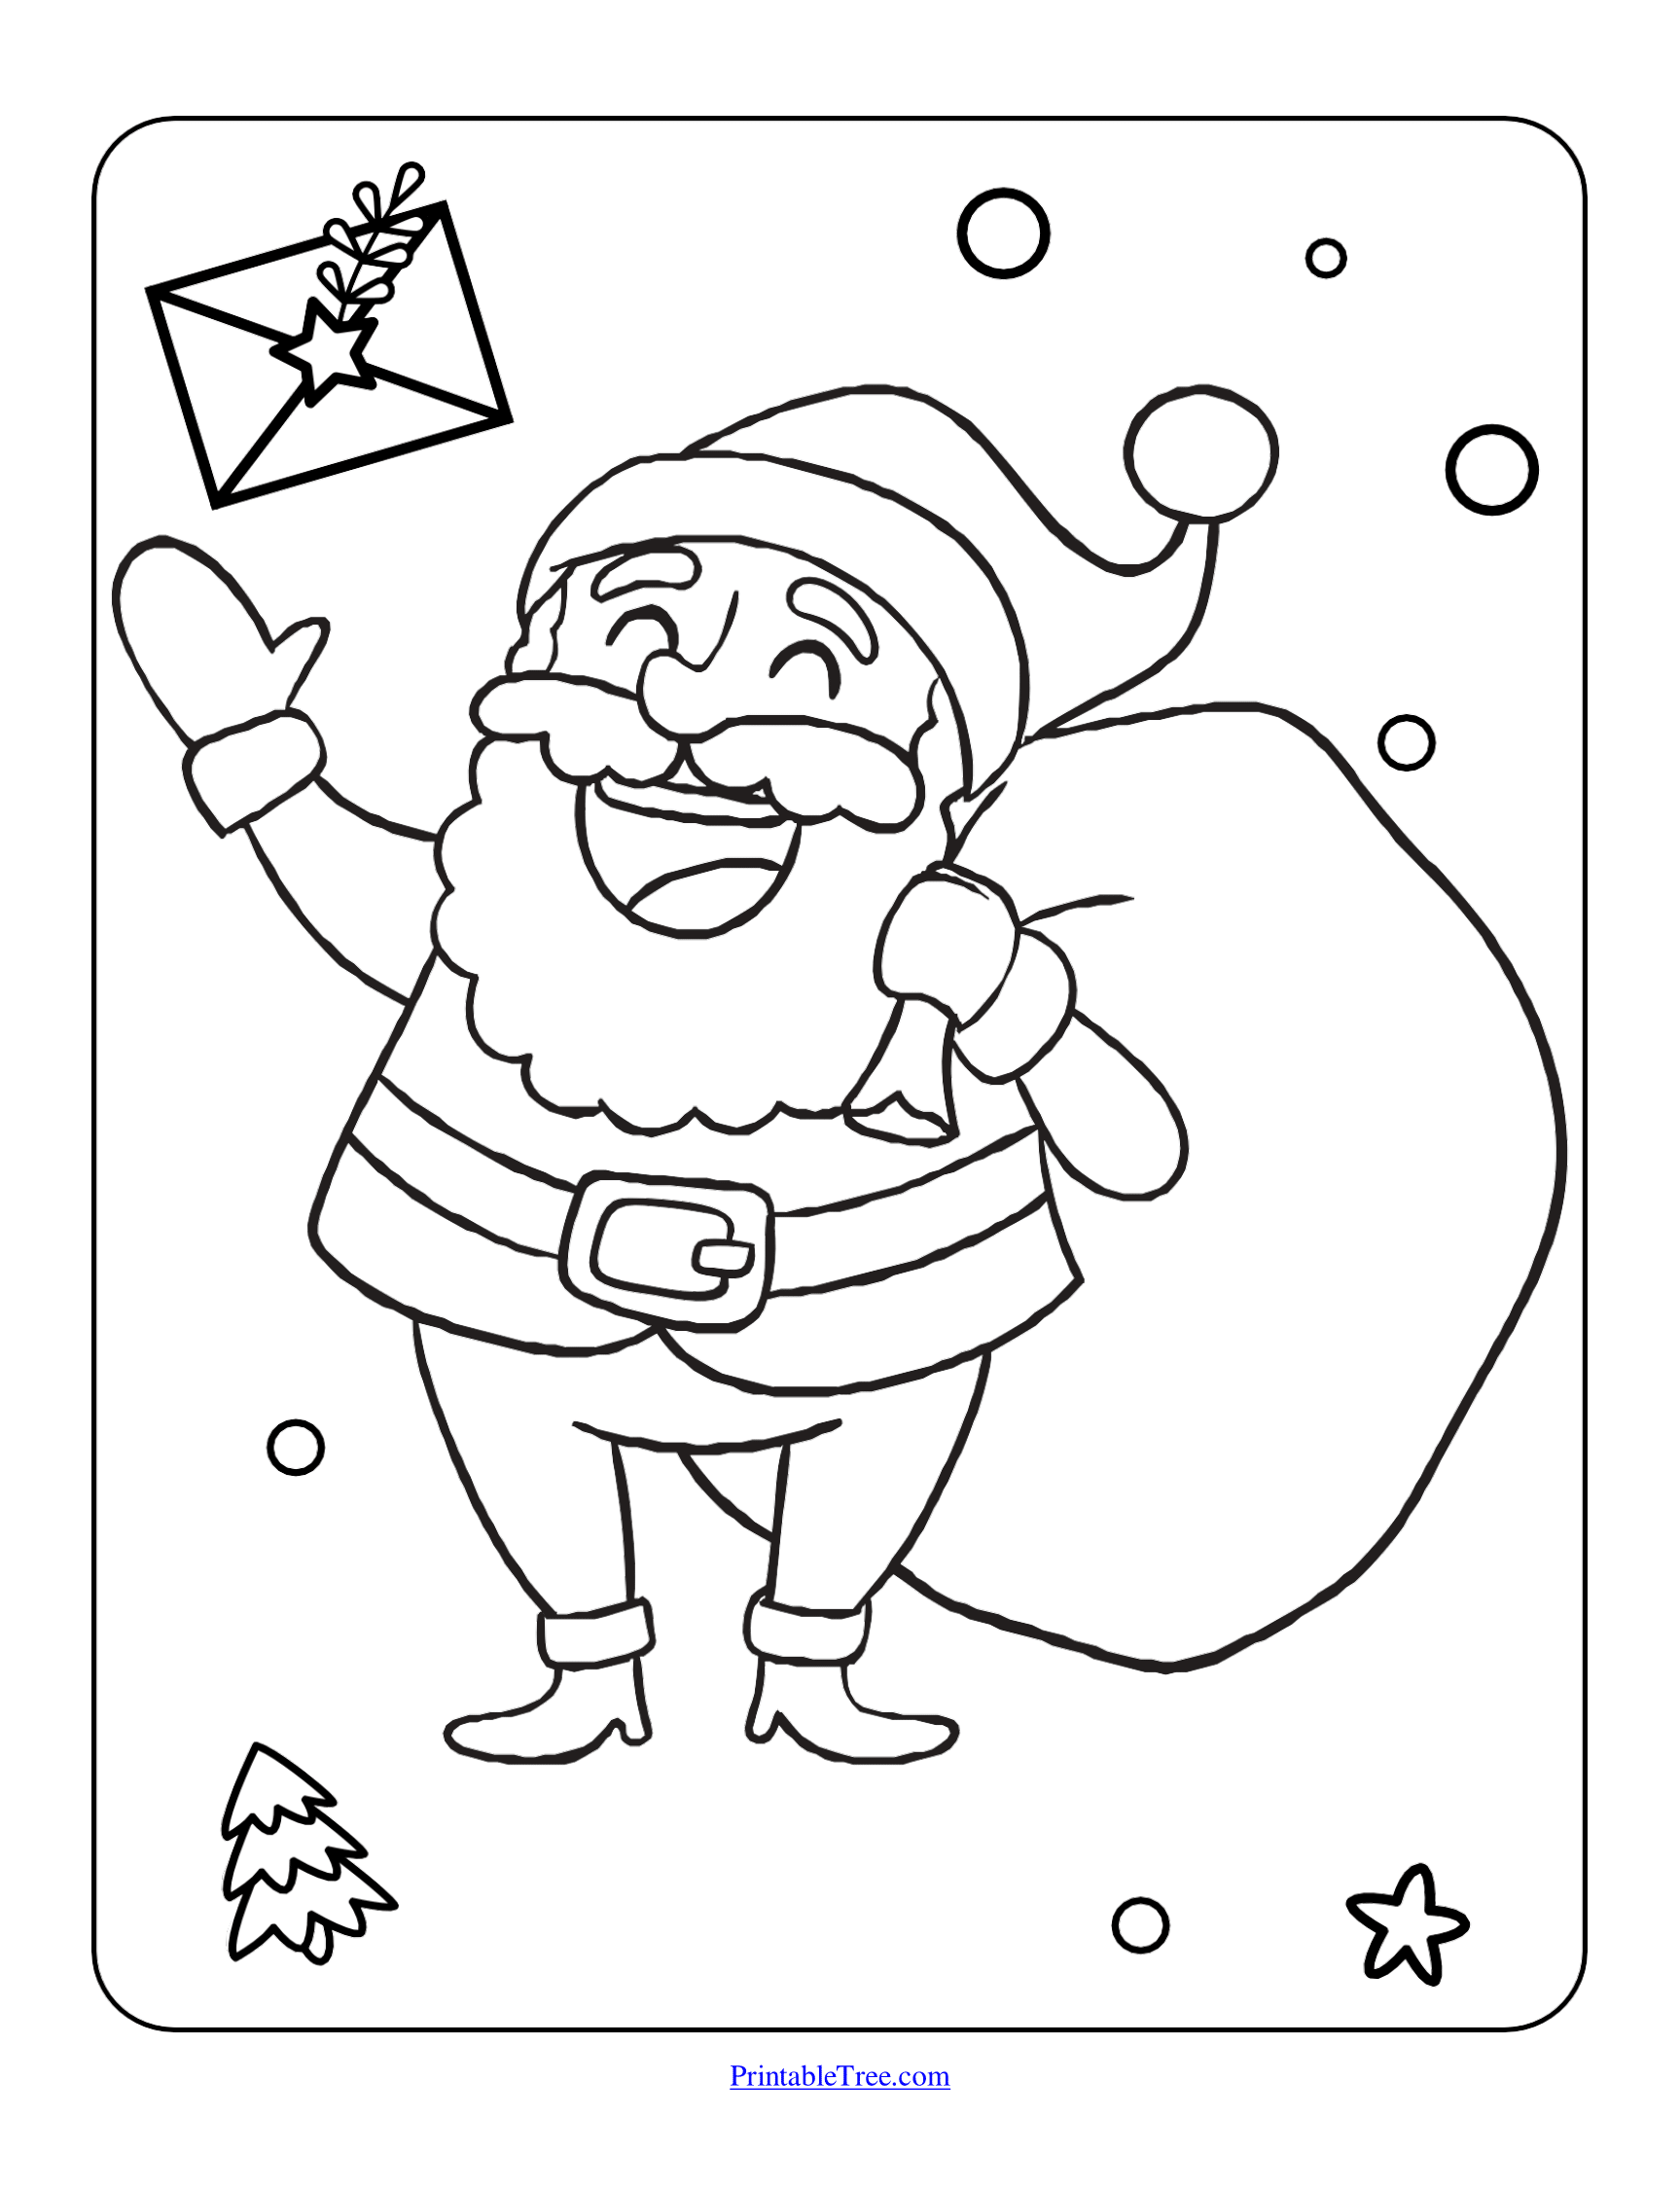 Free printable christmas coloring pages pdf for kids and adults